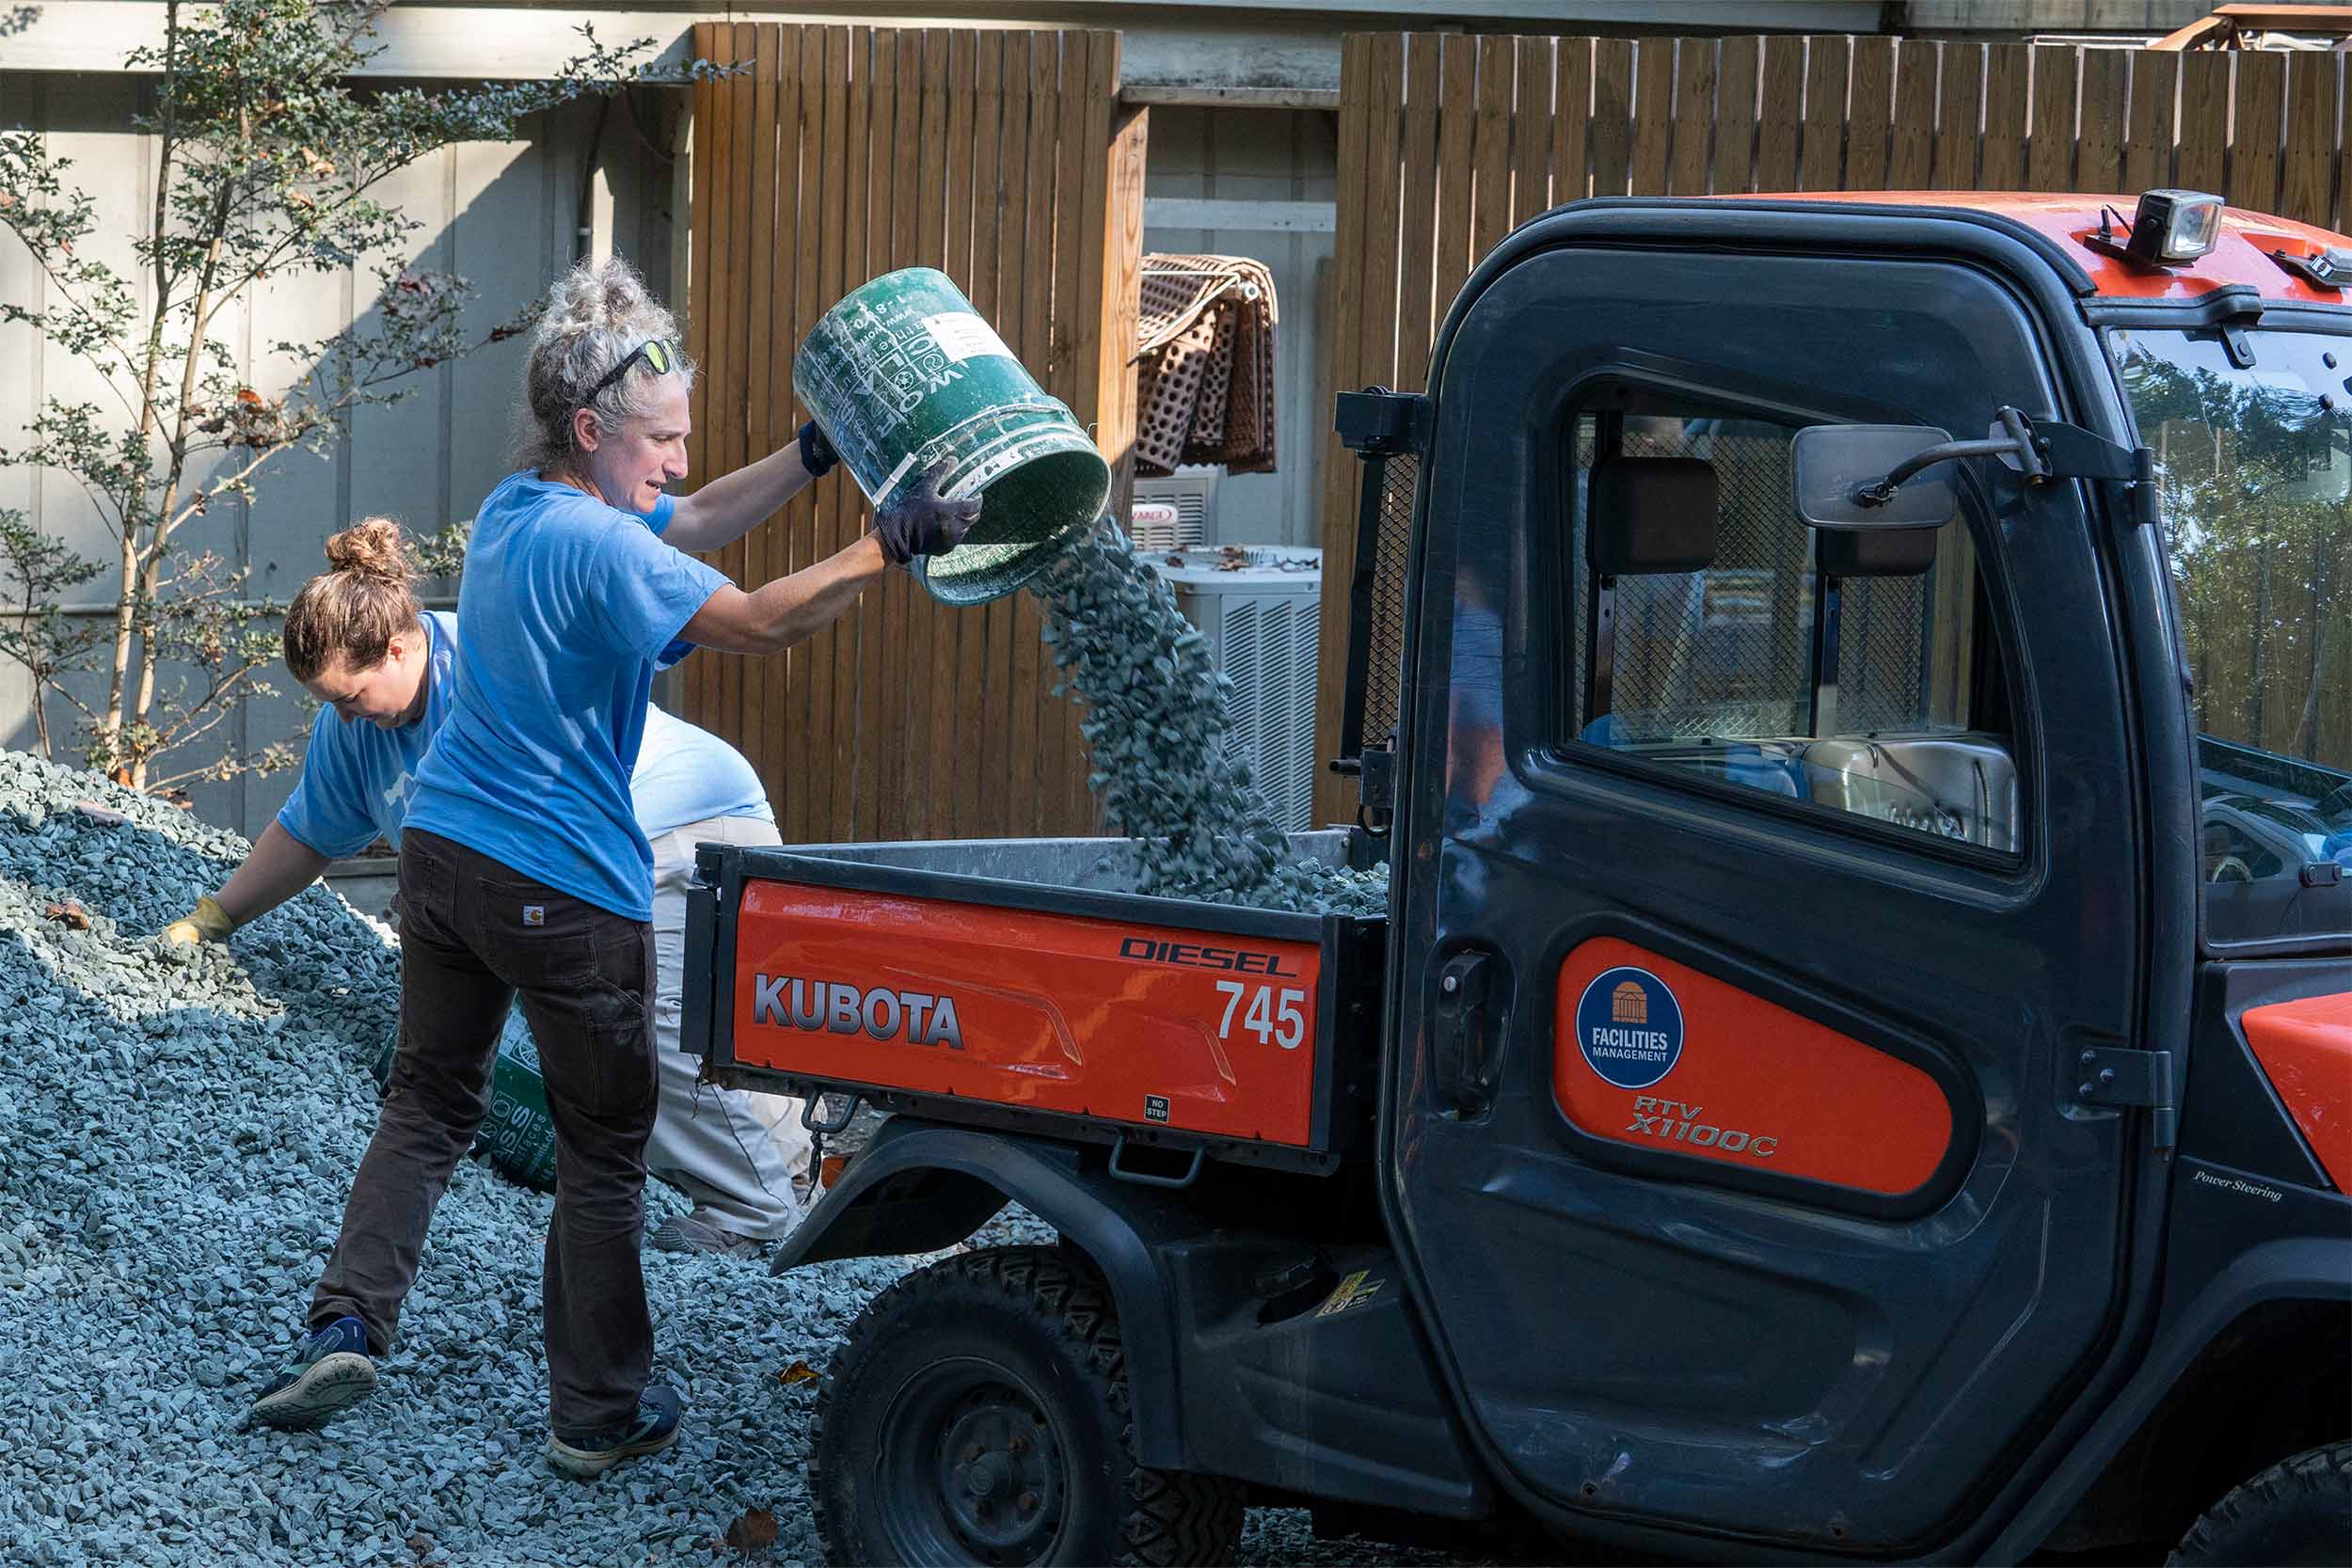 A woman dumps a bucket of gravel into the bed of a utility vehicle.